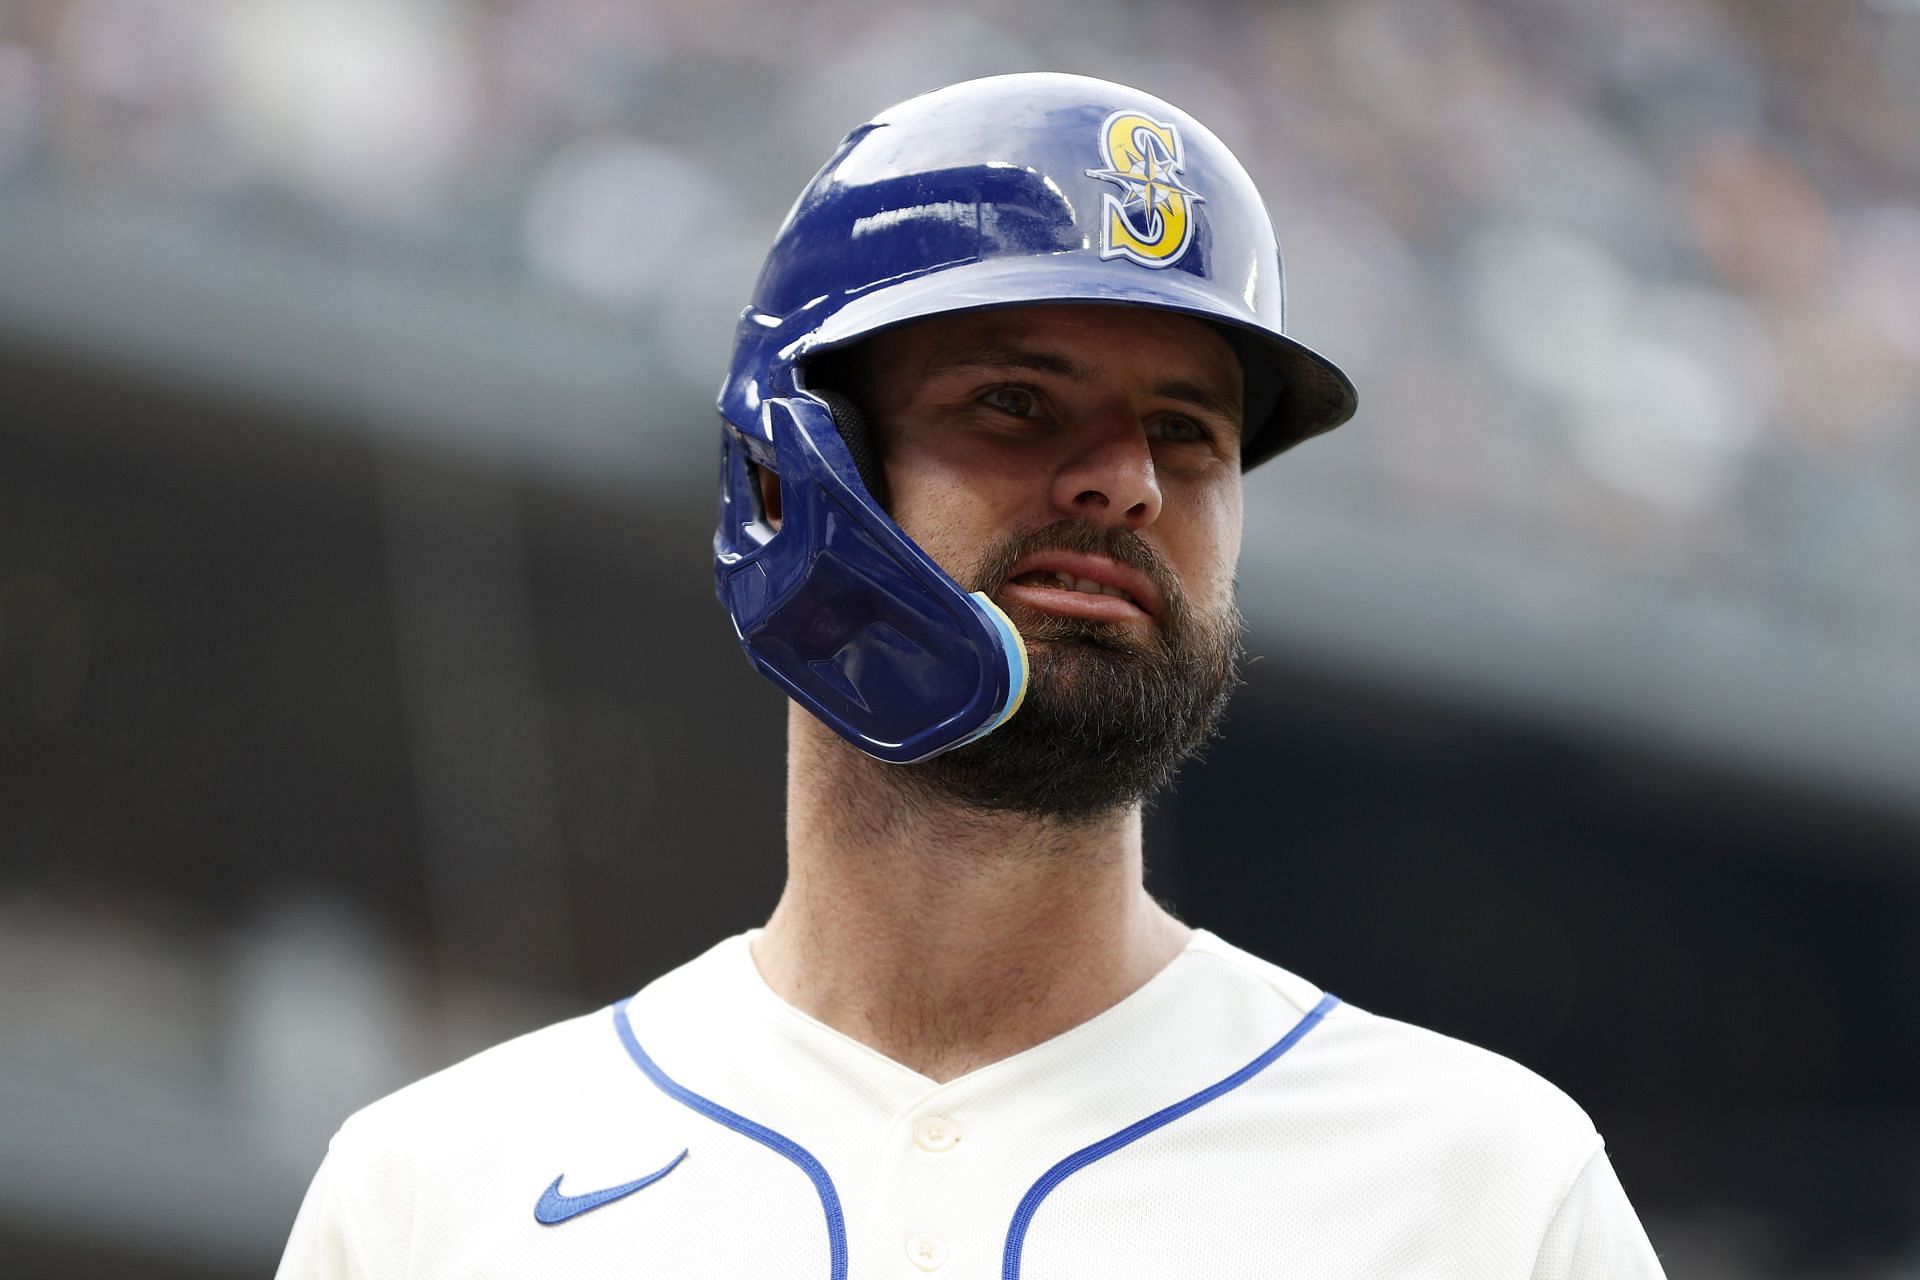 MLB Trade Rumors: Jesse Winker being shopped by the Mariners after